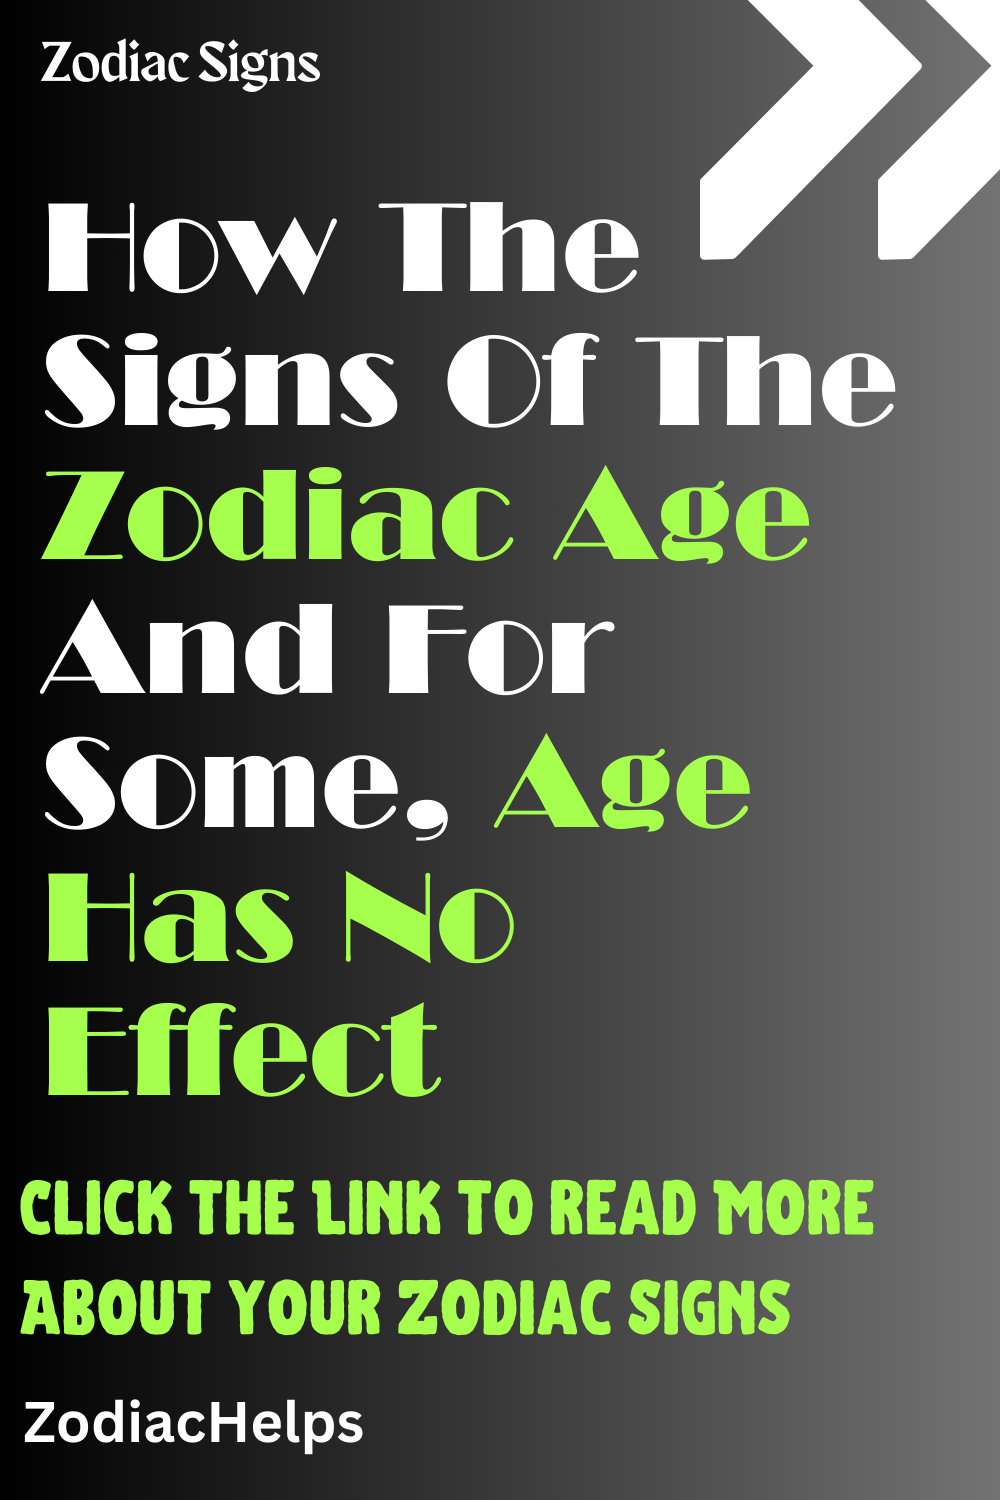 How The Signs Of The Zodiac Age – And For Some, Age Has No Effect